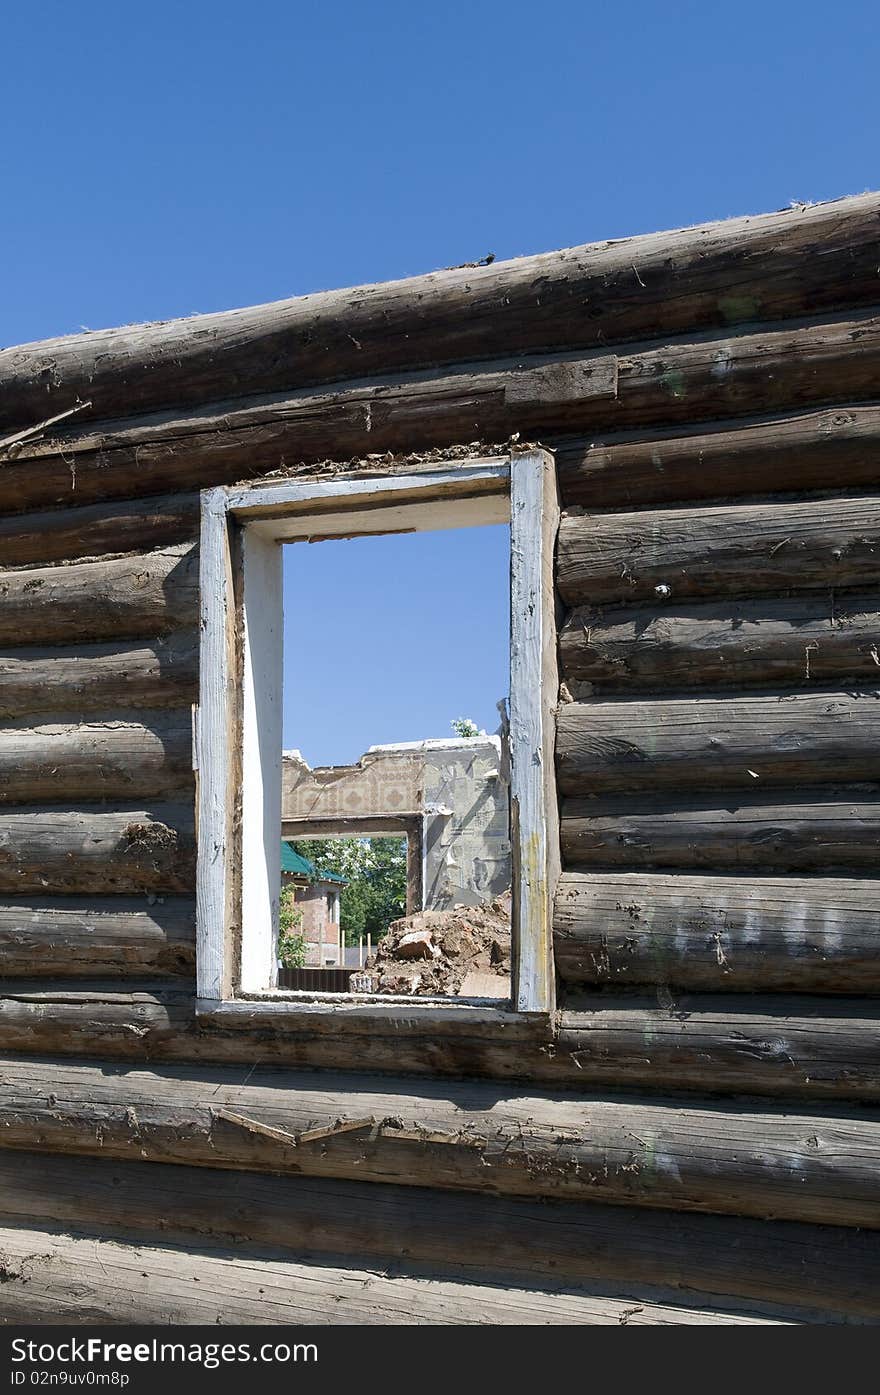 Wall of the wooden destroyed house with a window aperture.